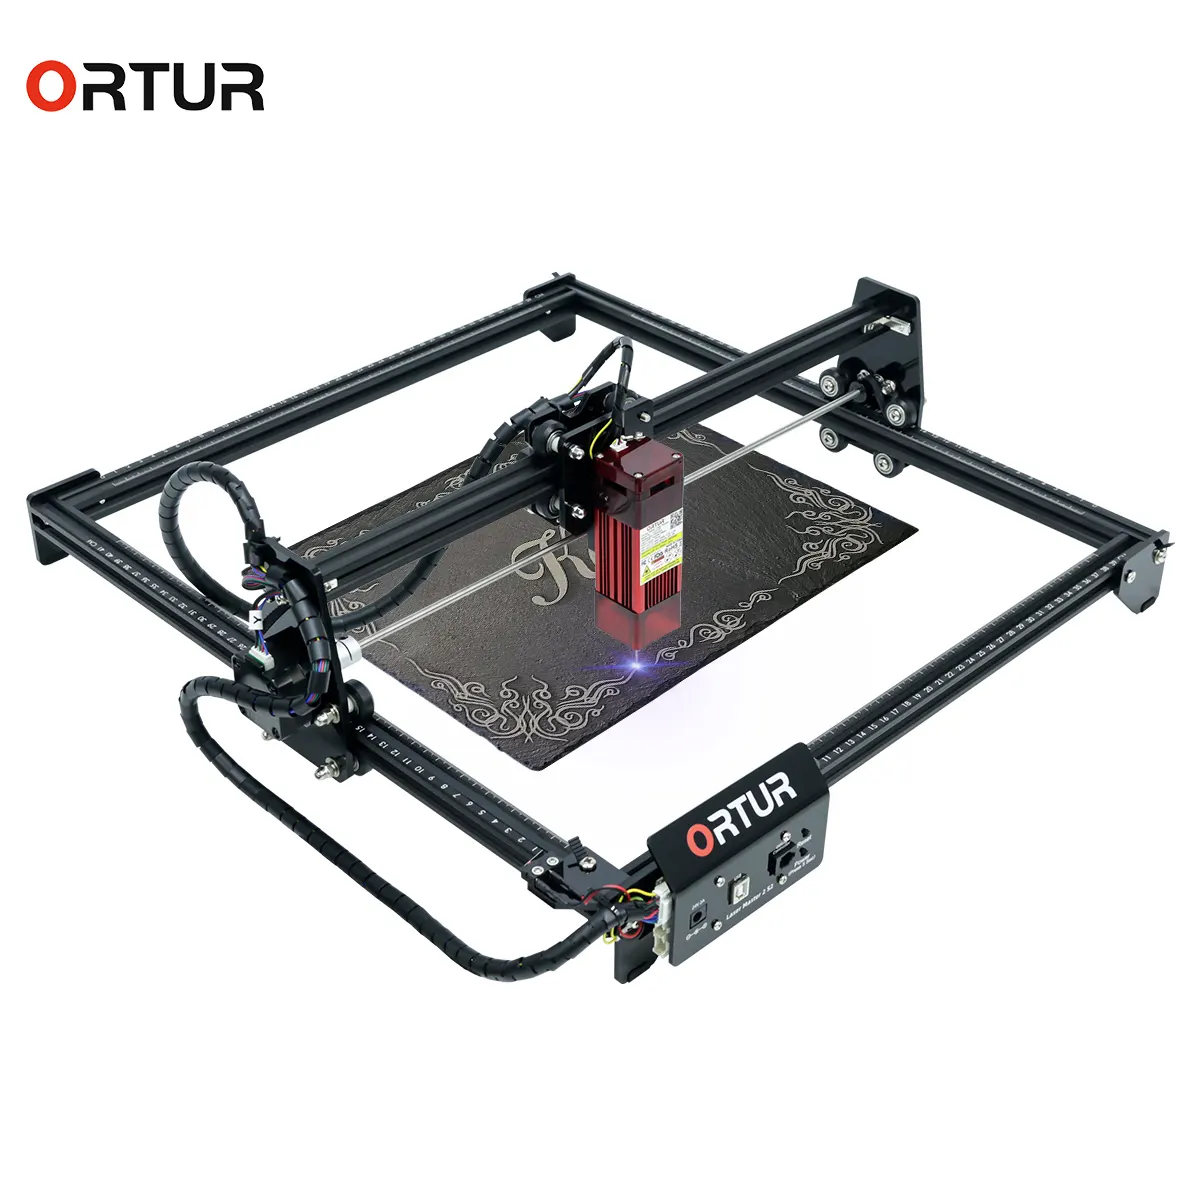 Ortur Laser Master 2 20W Laser Engraver CNC Quick Assembly 39x41cm Carving Area Fixed-Focus Laser Engraving and Cutting Machine